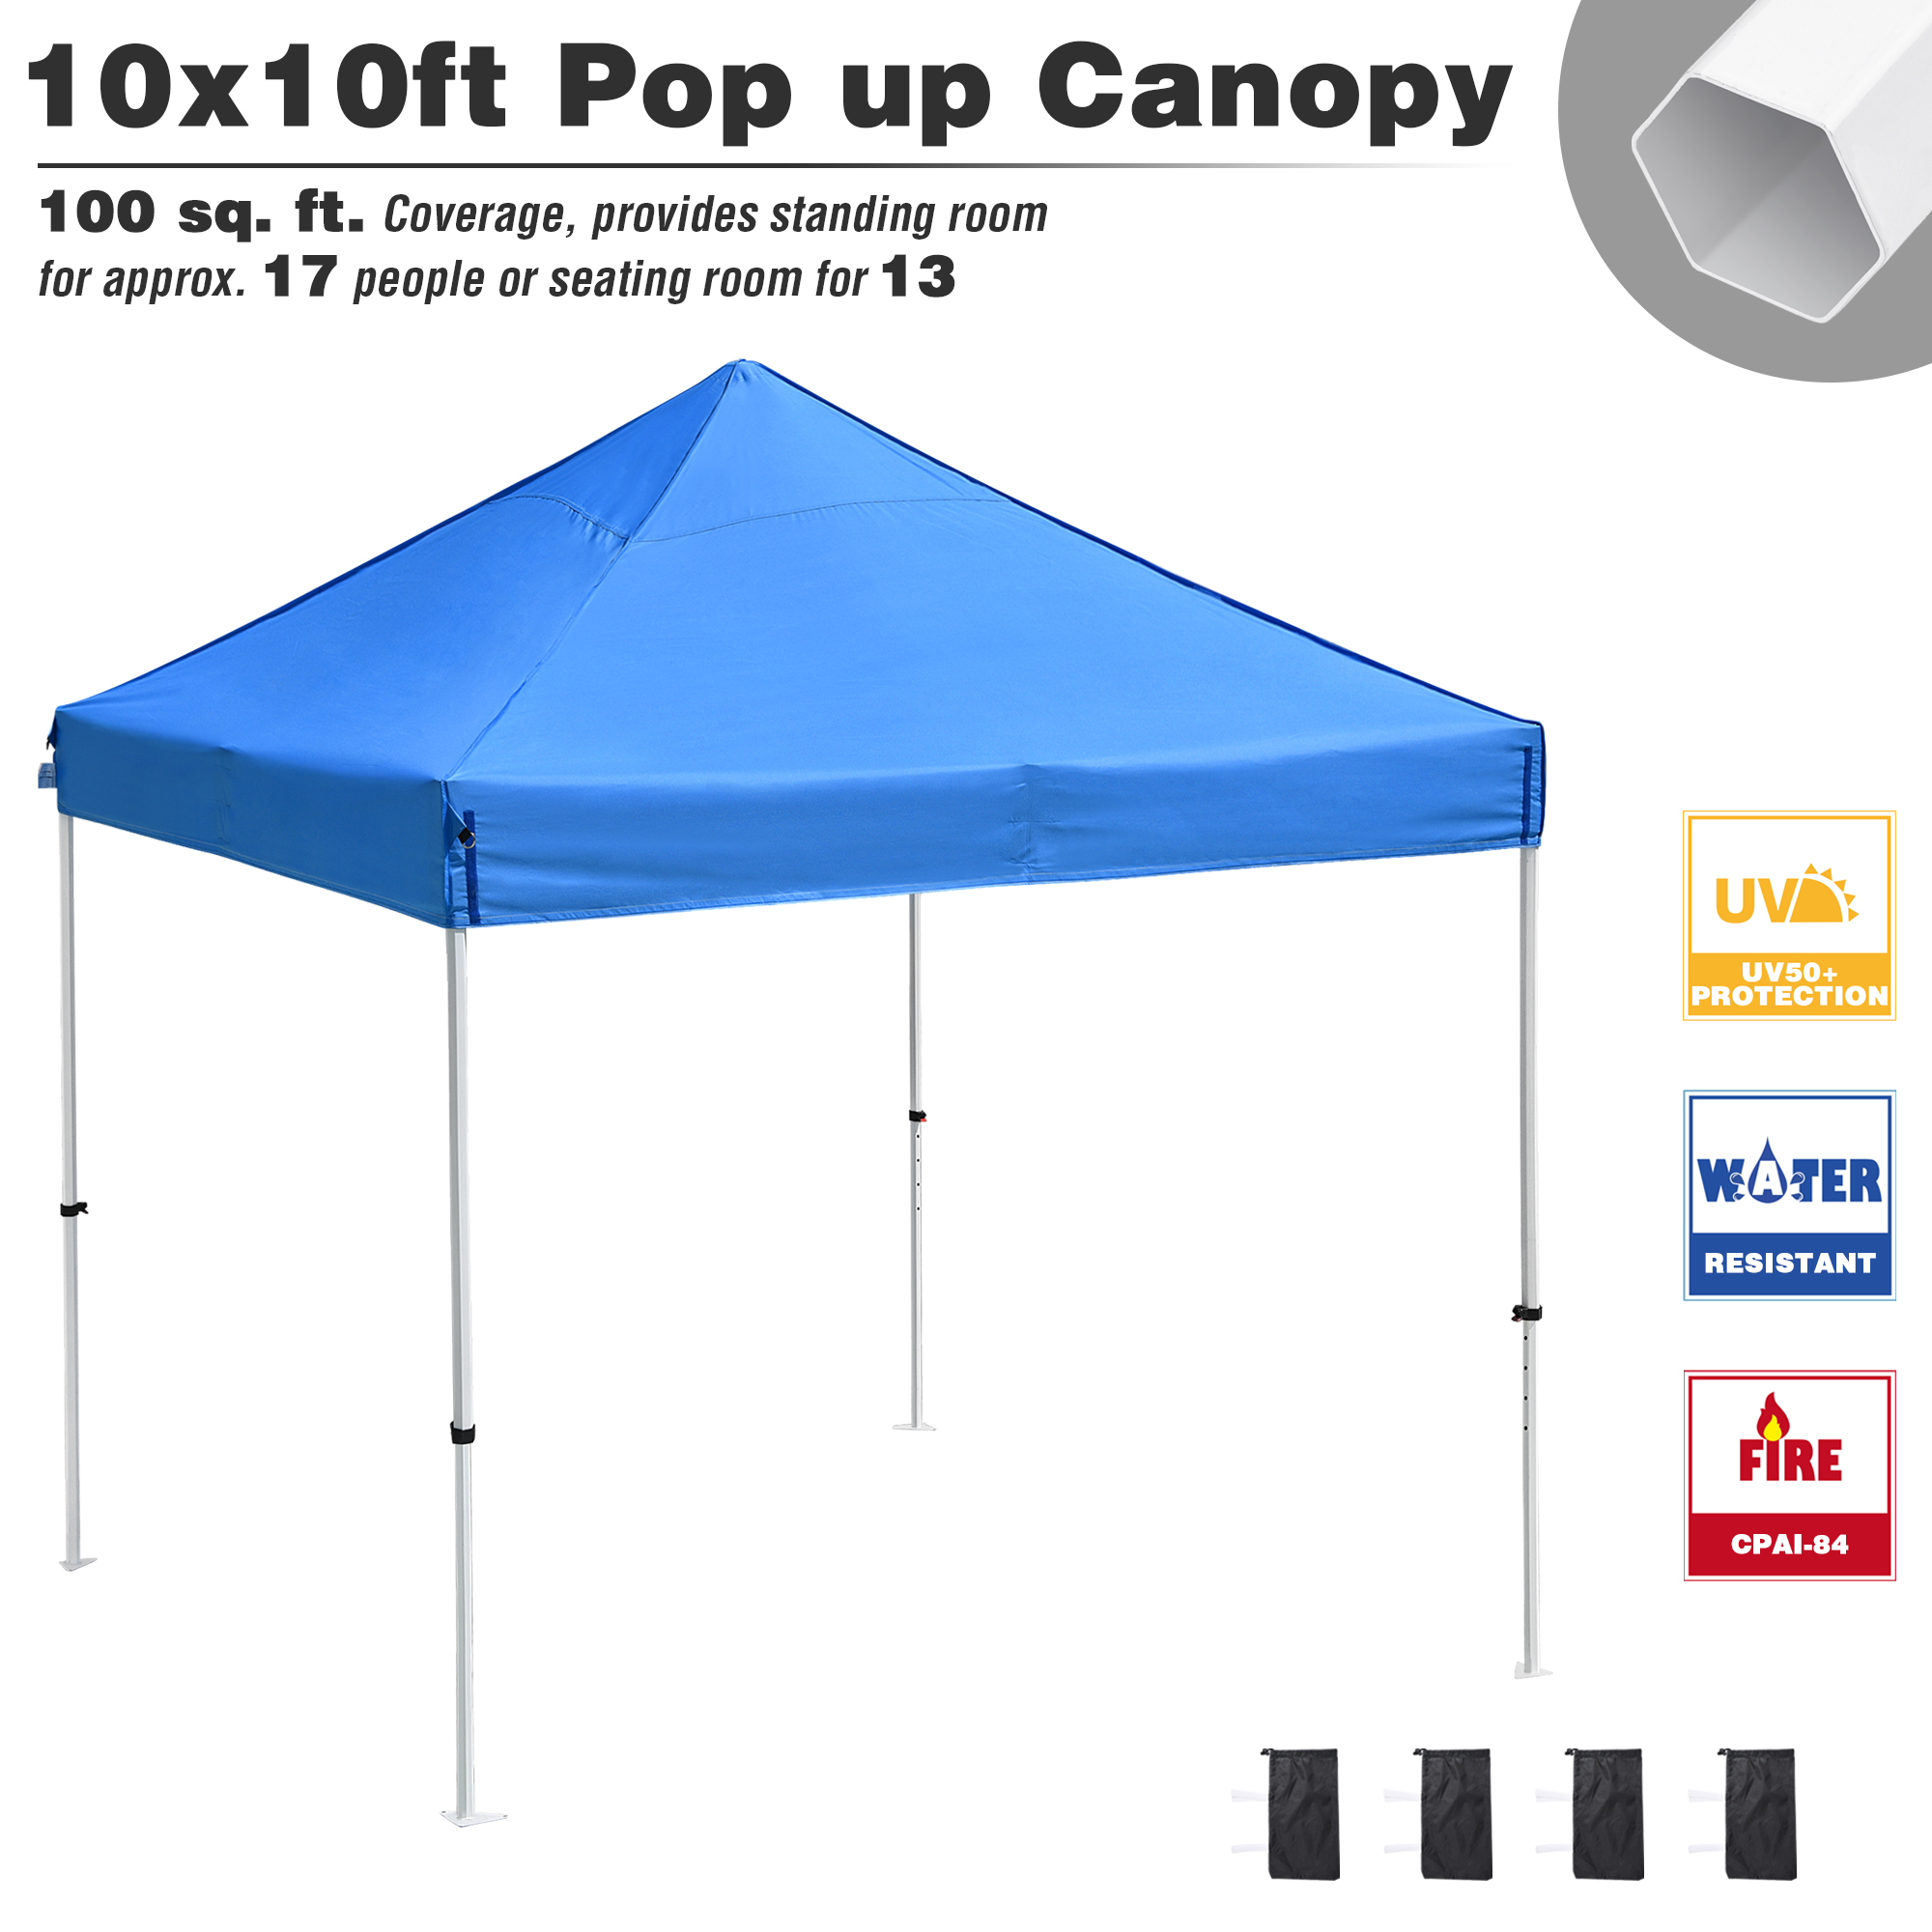 Instahibit 10x10 ft Pop Up Canopy Tent & 4 Mesh Sidewall Instant Shelter Market - image 3 of 11